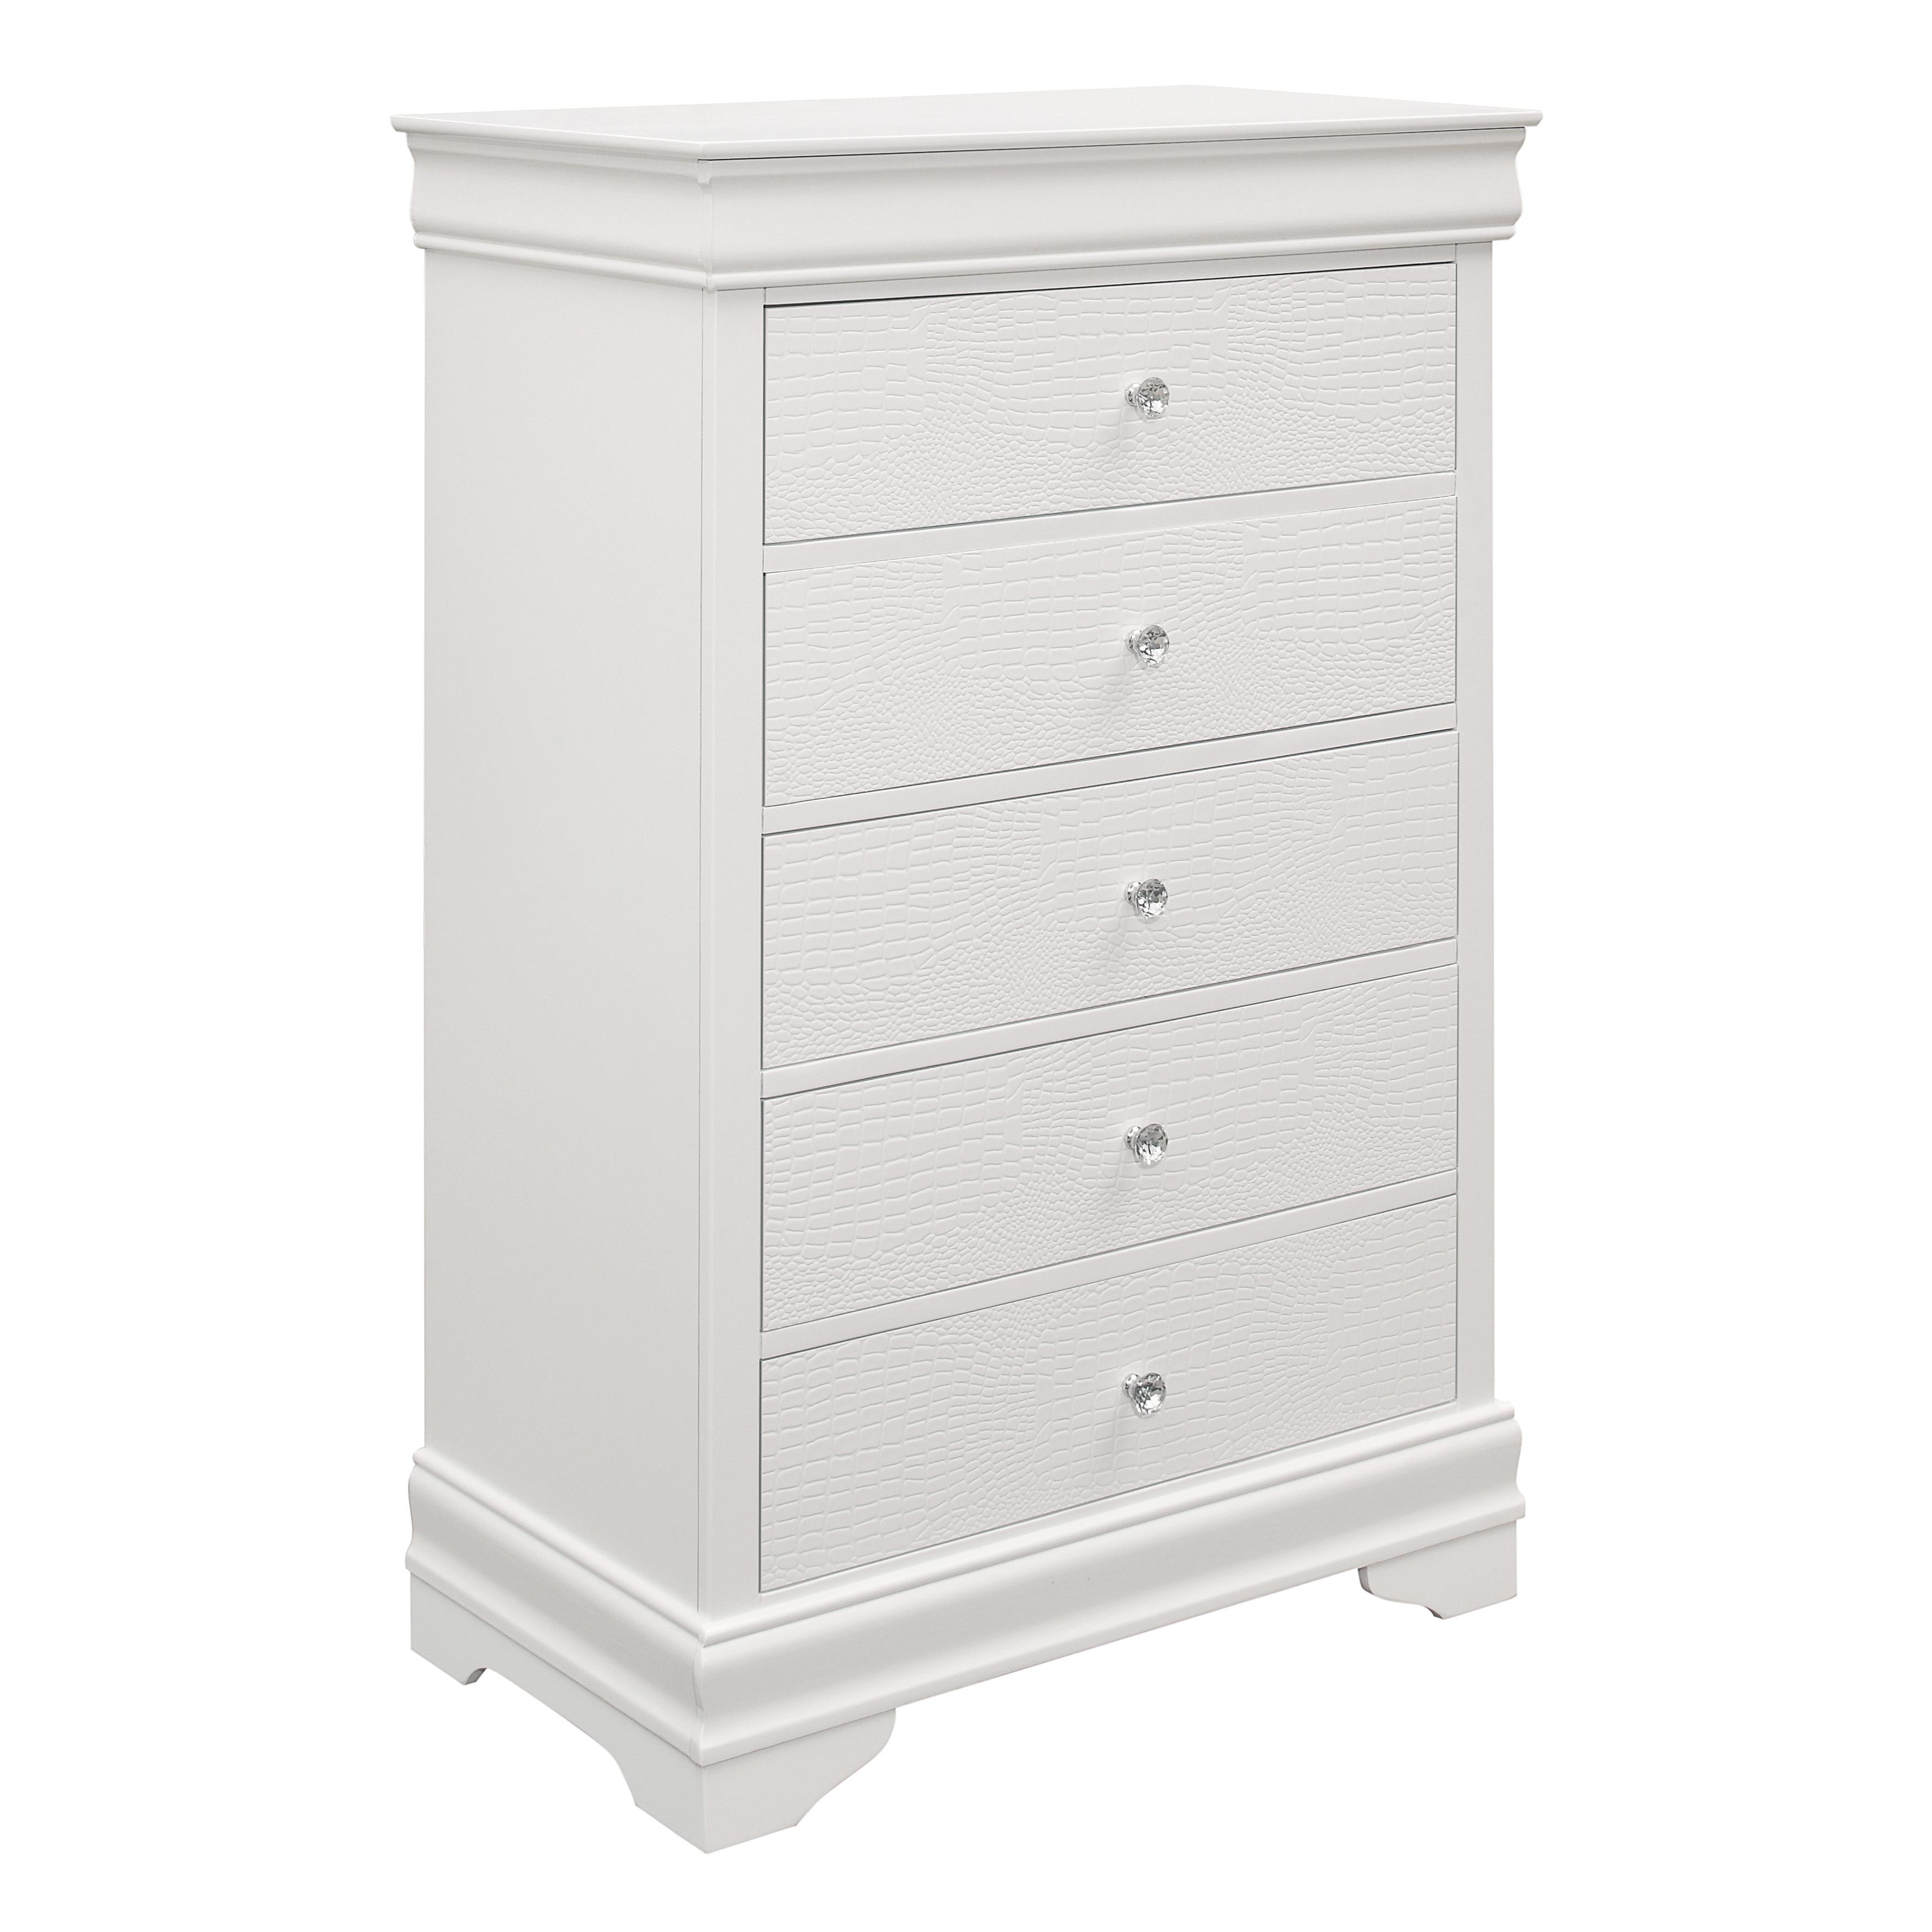 Traditional Chest 1556W-9 Lana 1556W-9 in White 